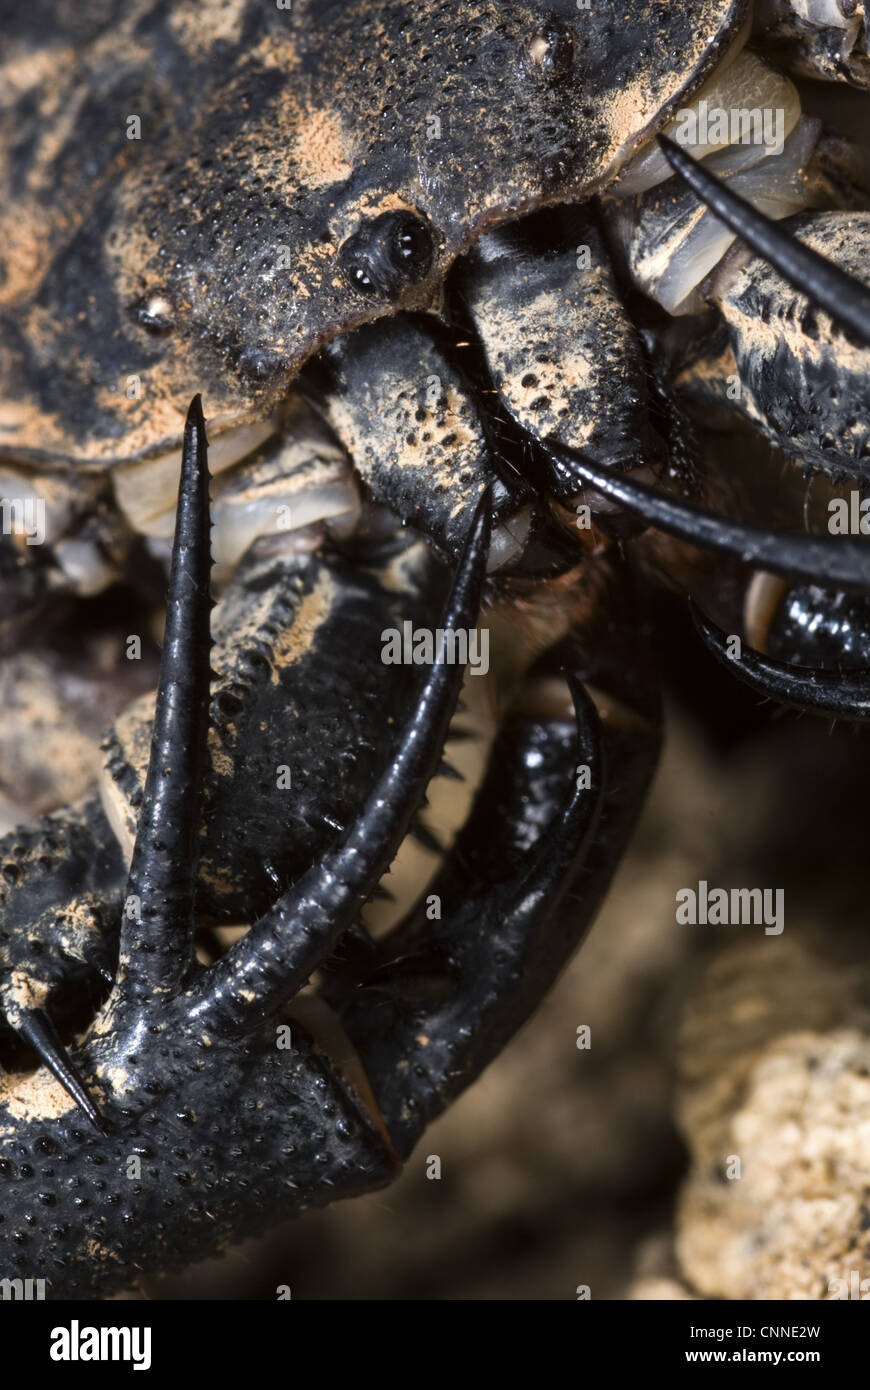 Variegated Tailless Whip Scorpion (Damon variegatus) adult female, close-up of palps with raptorial spurs, Central Africa Stock Photo